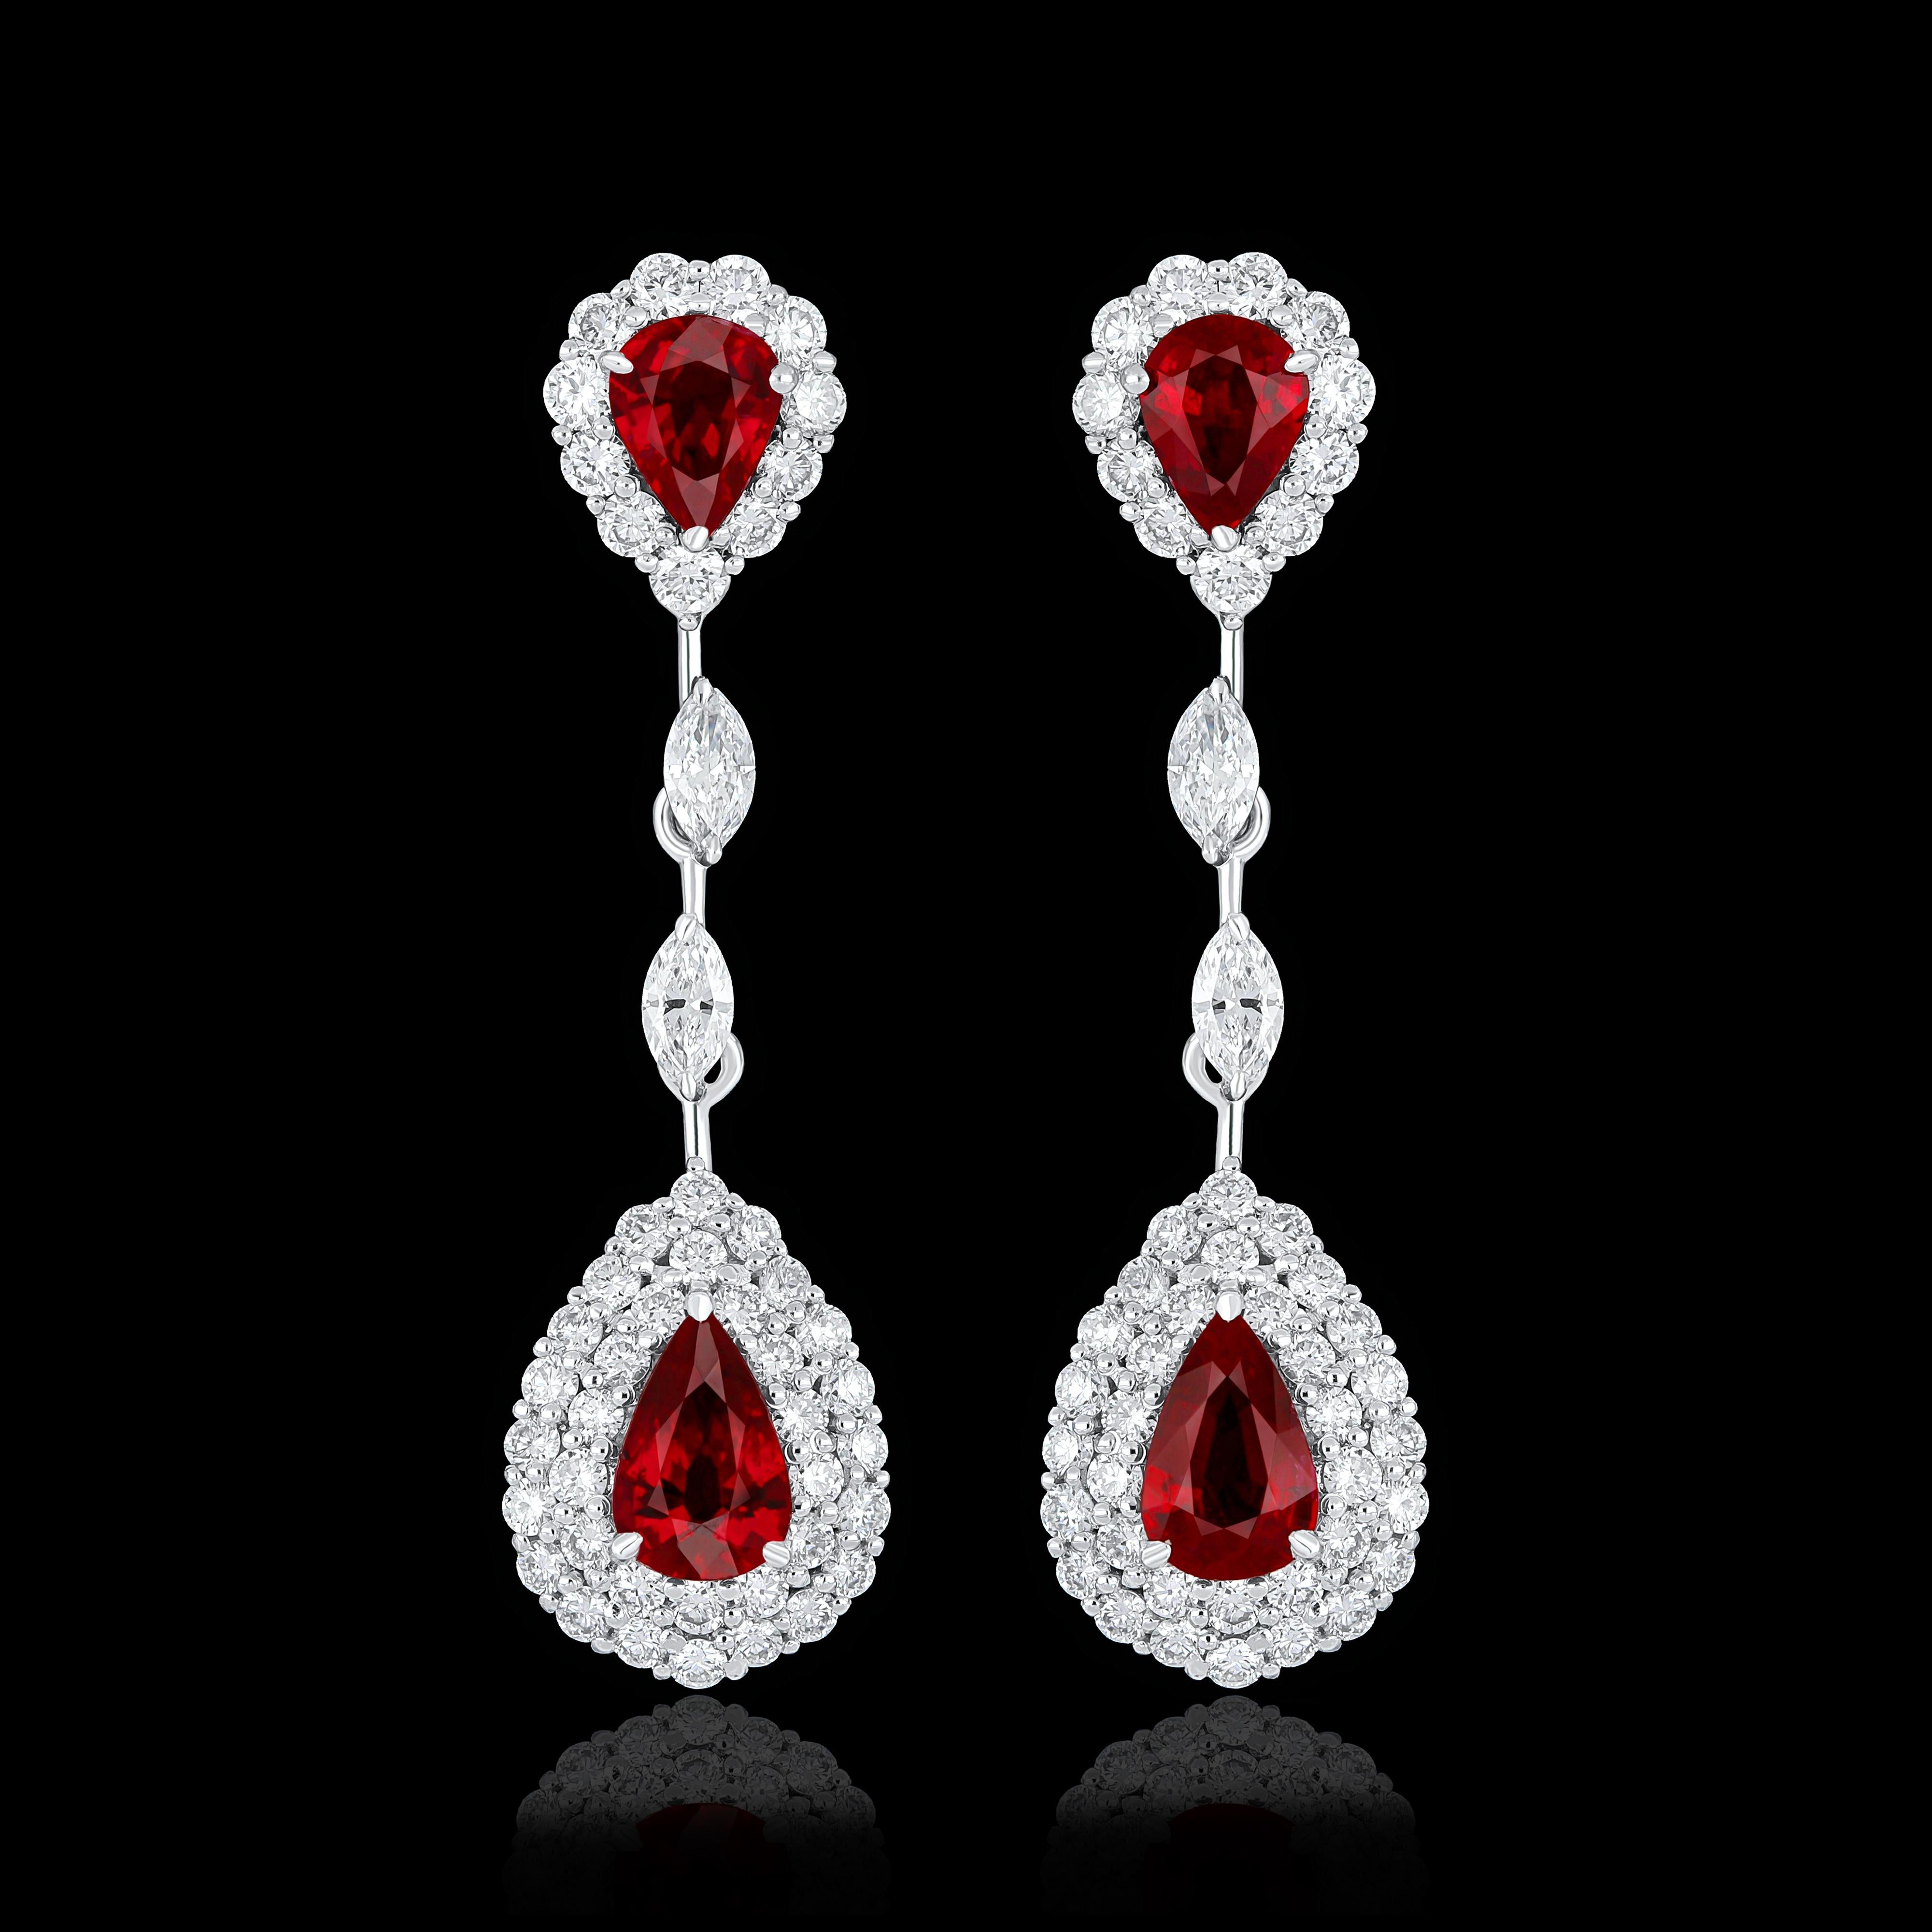 Elegant and exquisitely detailed 18 Karat White Gold Earring, set with total 1.3 Cts .Pear Shape Mozambique Ruby and micro pave set Diamonds, weighing approx. 1.21Cts Beautifully Hand crafted in 18 Karat White Gold.

Stone Detail: 
Ruby Mozambique: